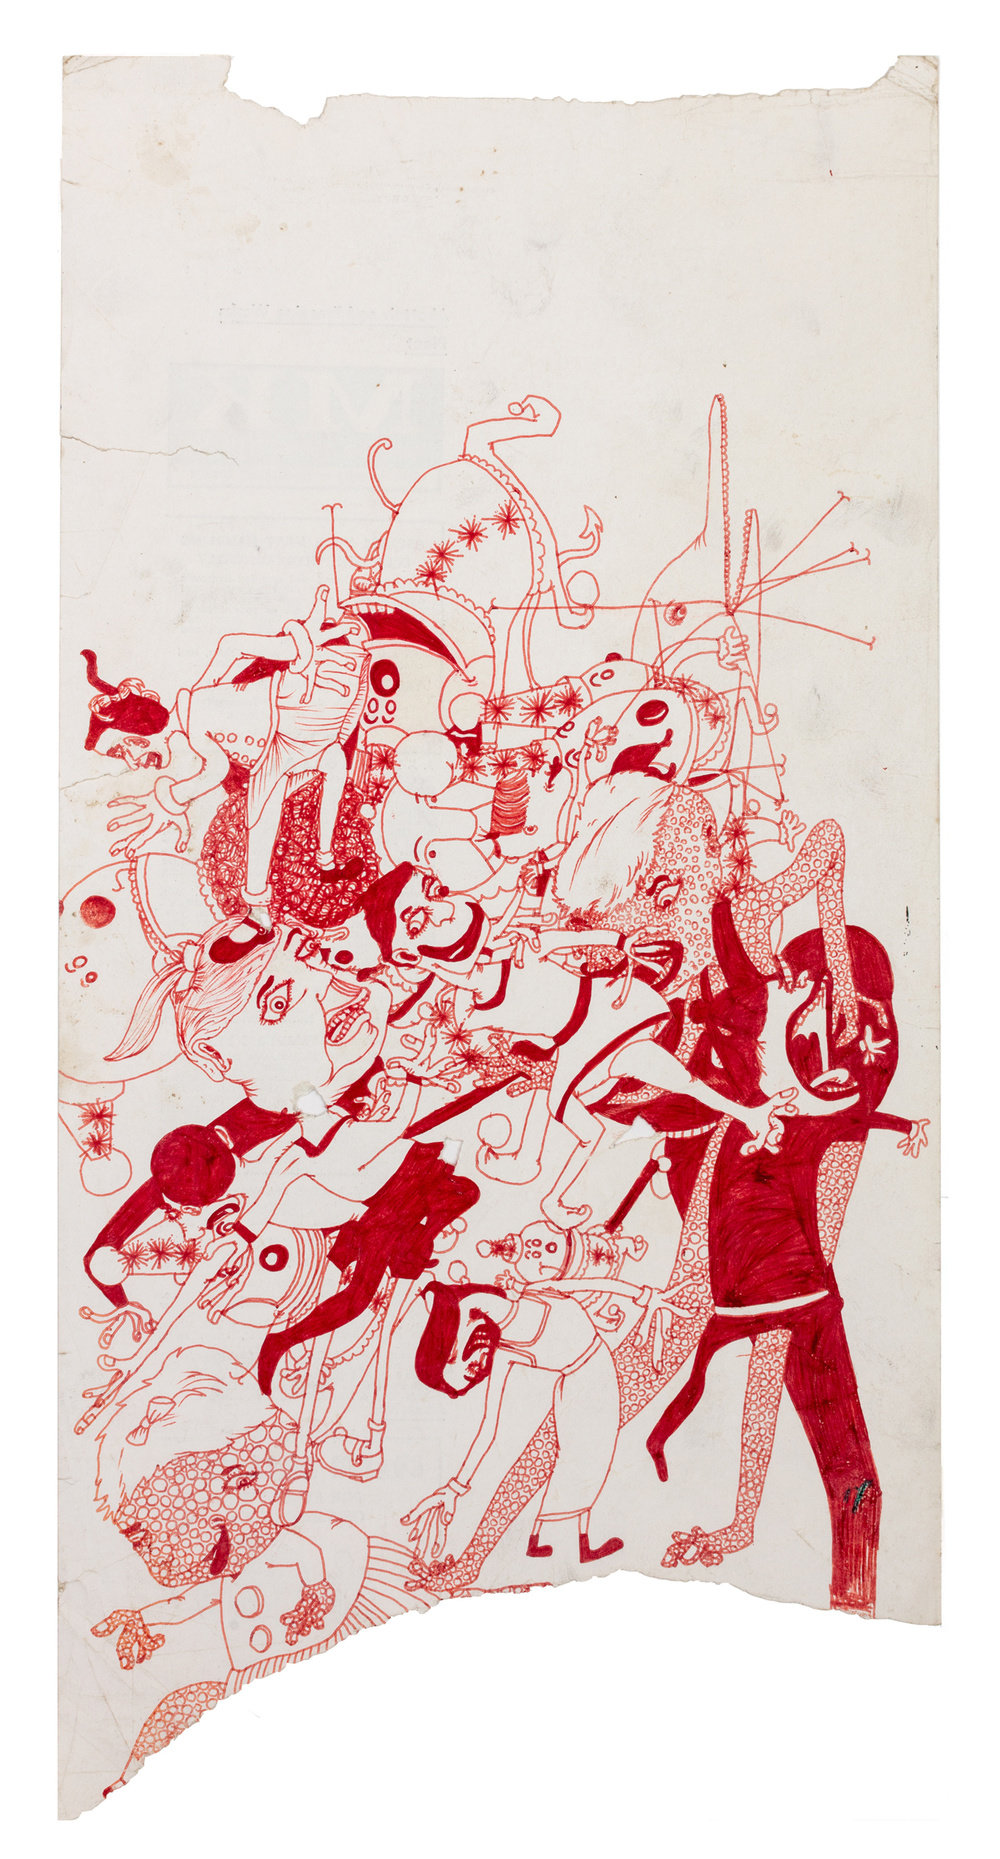 King, untitled, c. 1966 67, ink on paper, 14.25 x 7.25 in., 36.5 x 18.5 cm 370046